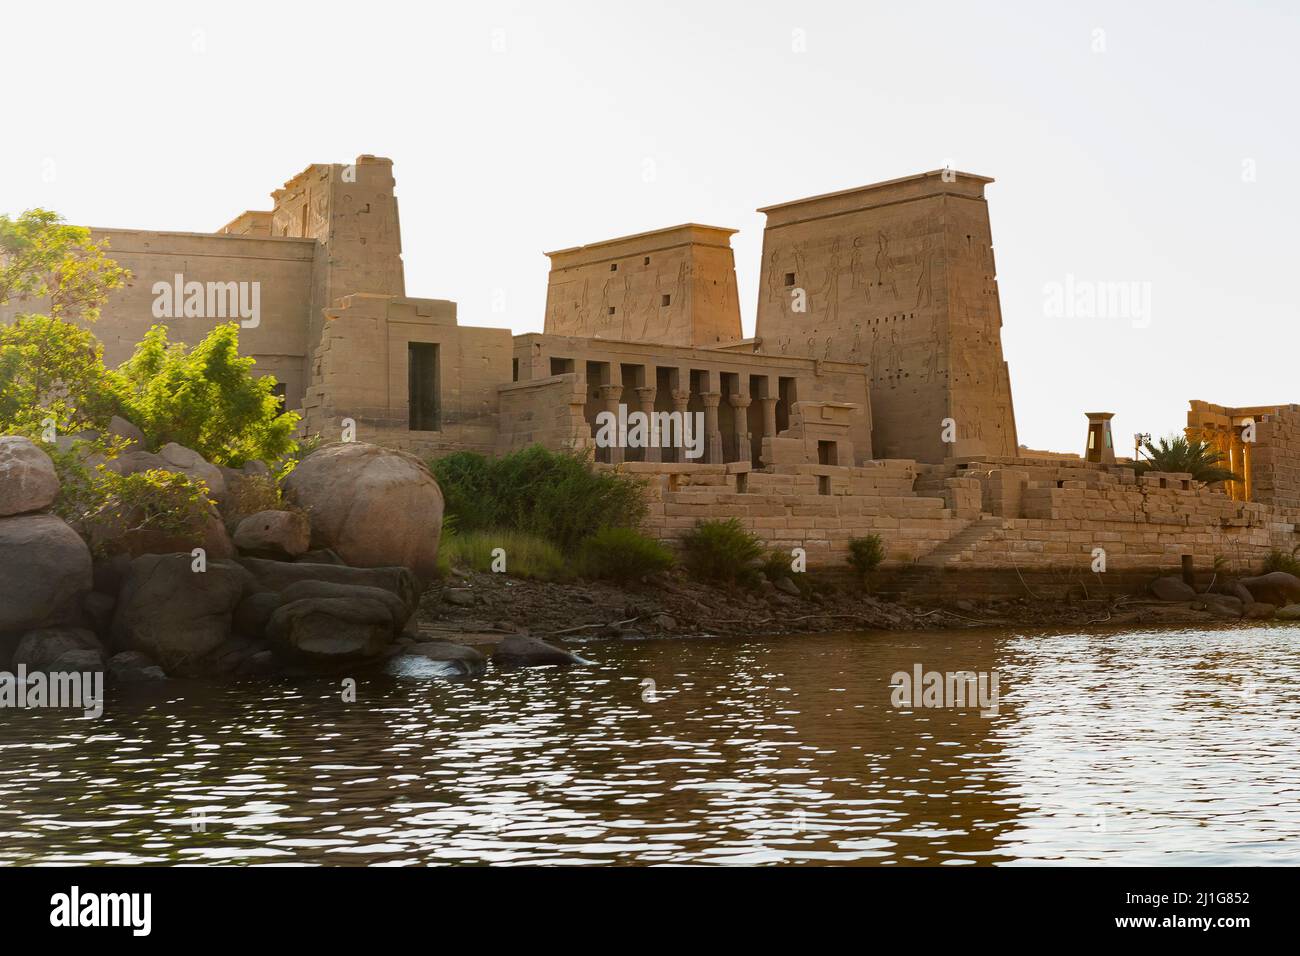 The temple complex at Philae, viewed from the Nile, Aswan Stock Photo